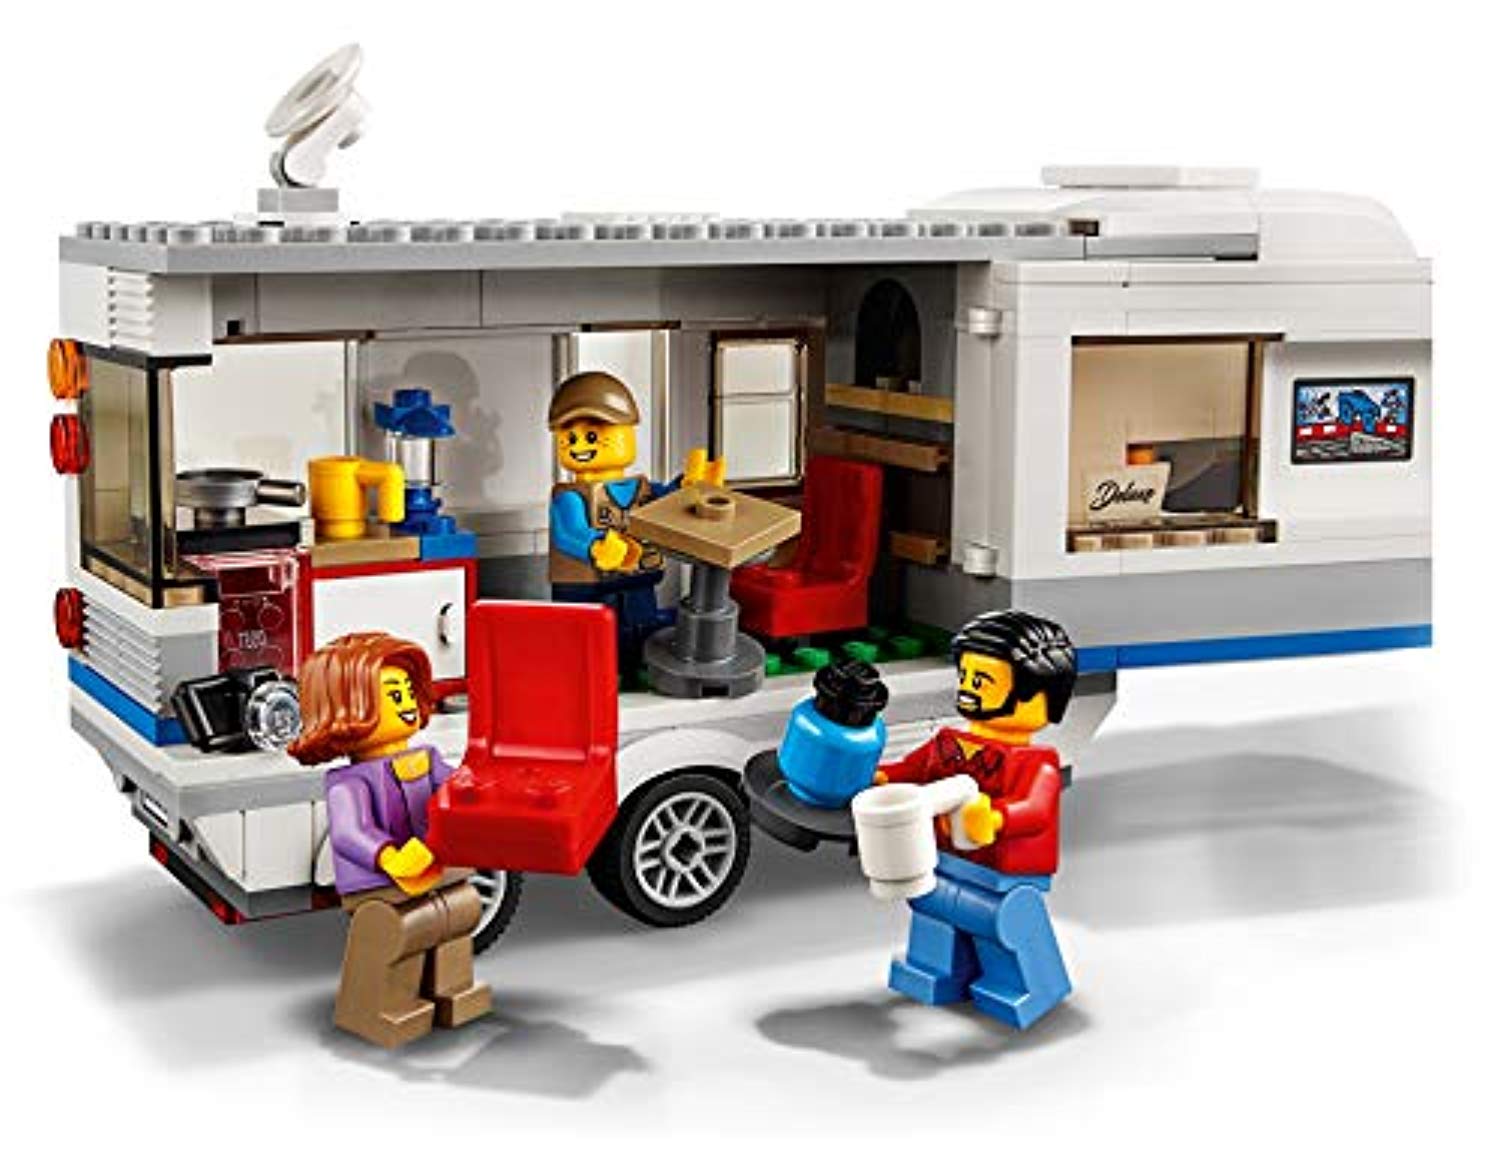 LEGO 60182 City Great Vehicles Pickup and Caravan Truck Toy with 3 Explorer Minifigures, Holiday Sets for Kids - Offer Games